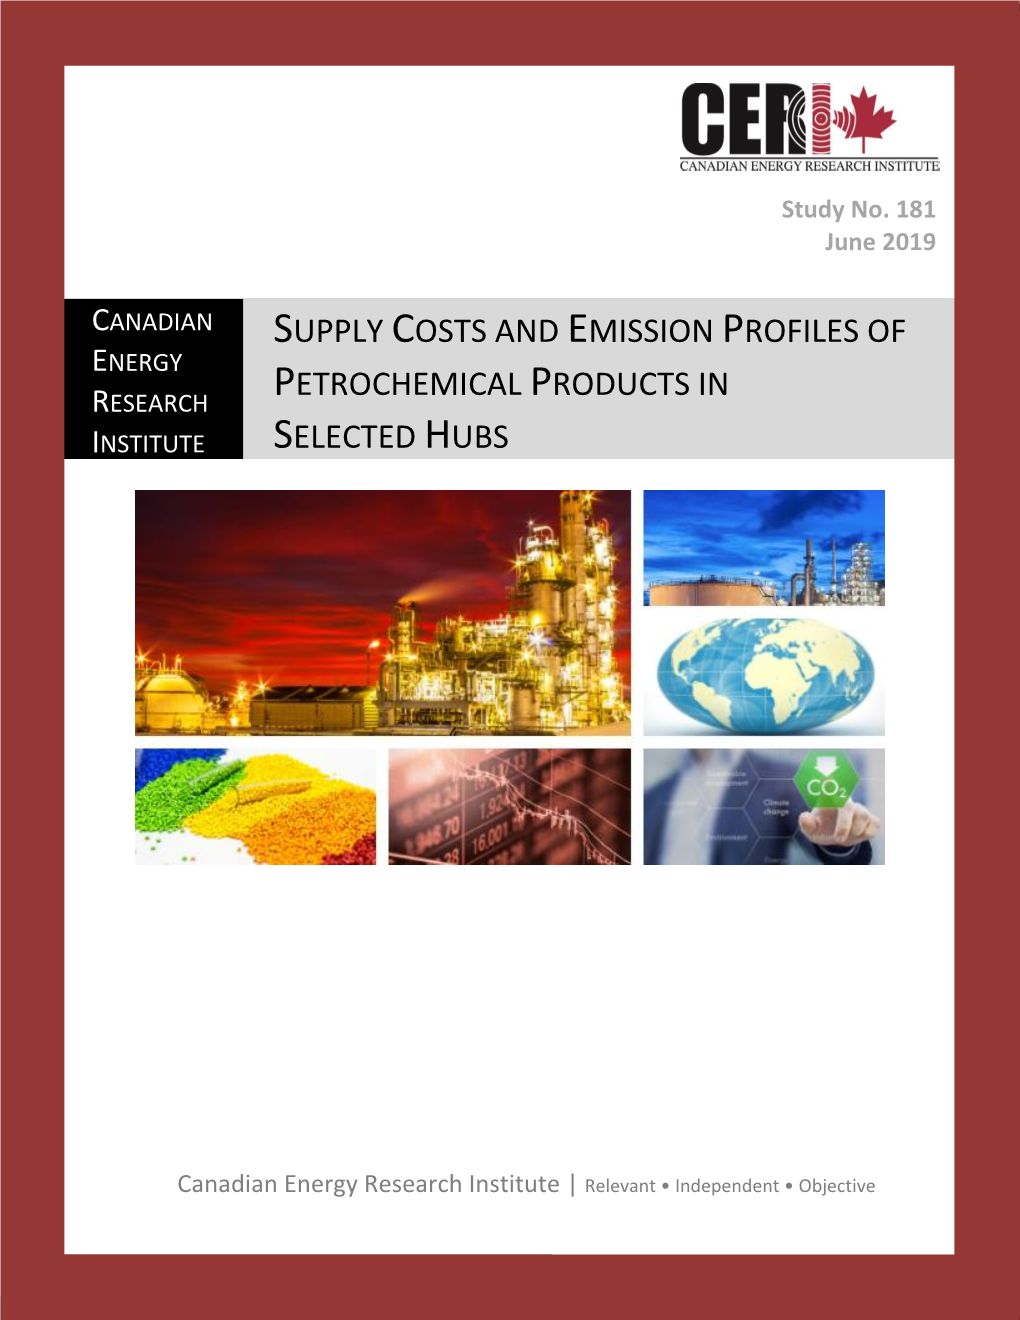 Supply Costs and Emission Profiles of Petrochemical Products in Selected Hubs